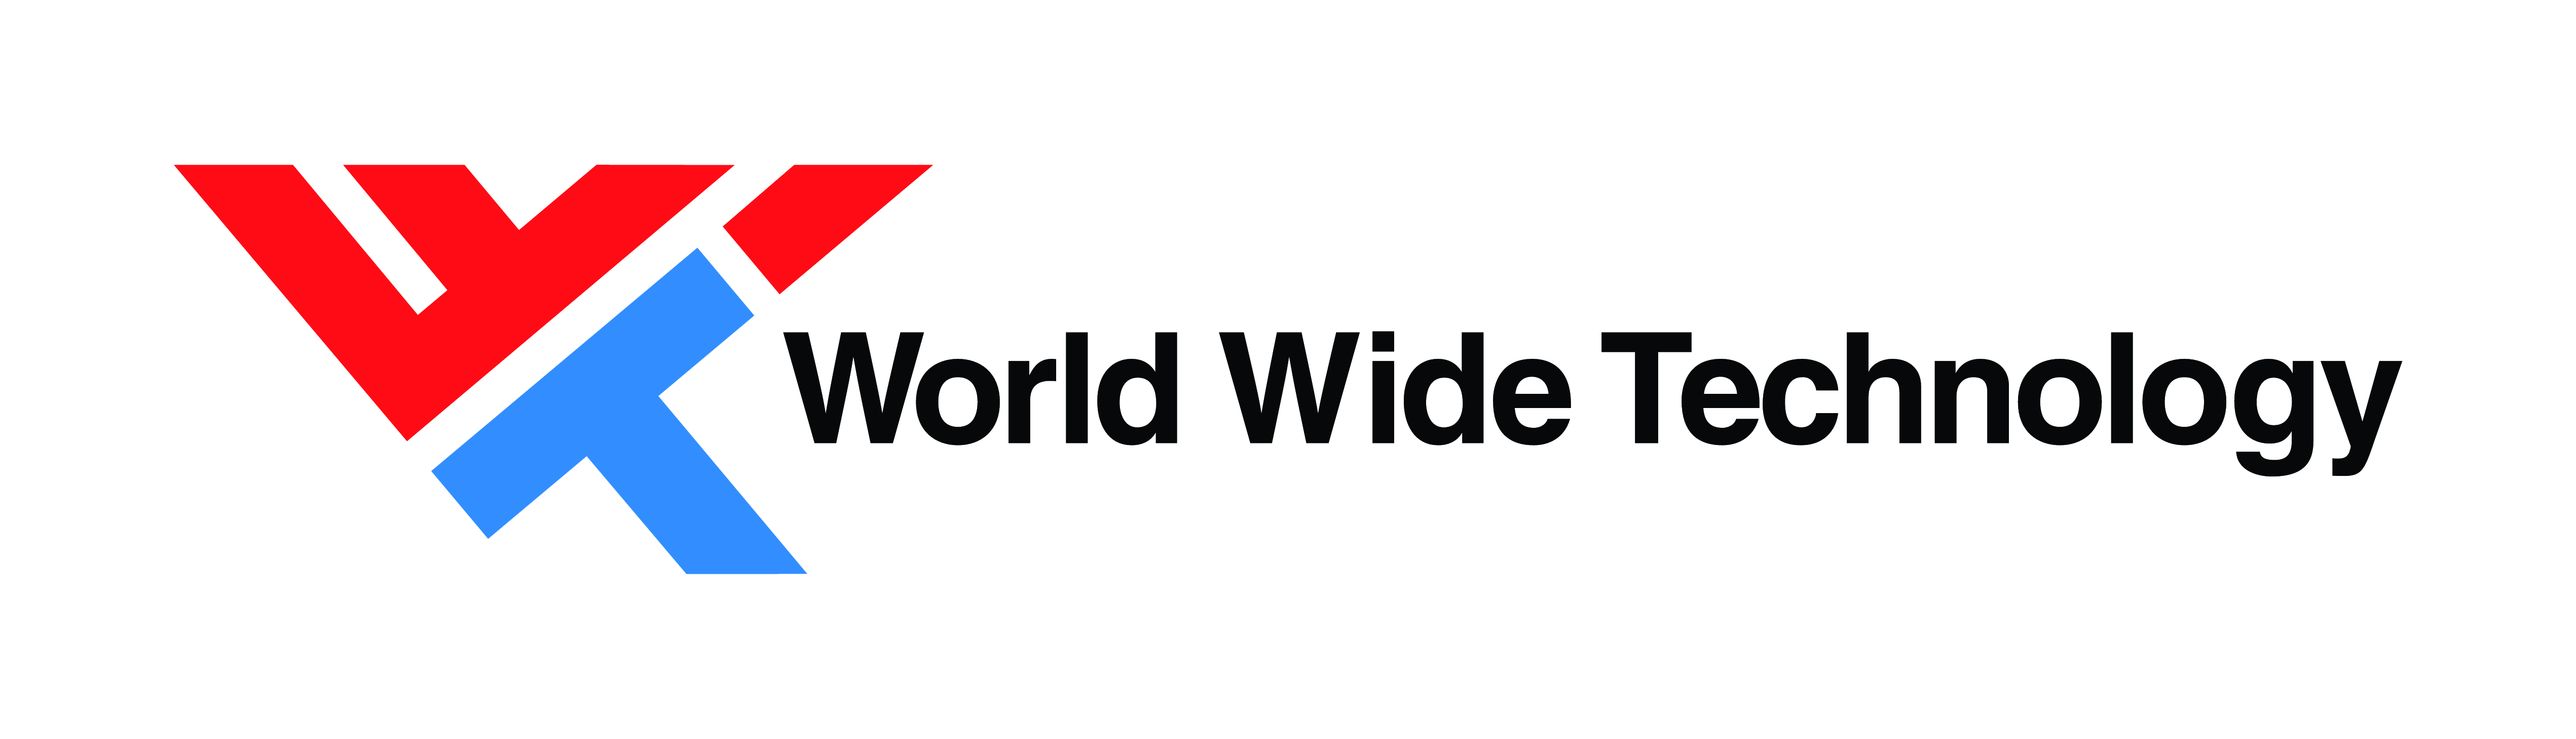 wwt-logo-color-horizontal-high.eps.png